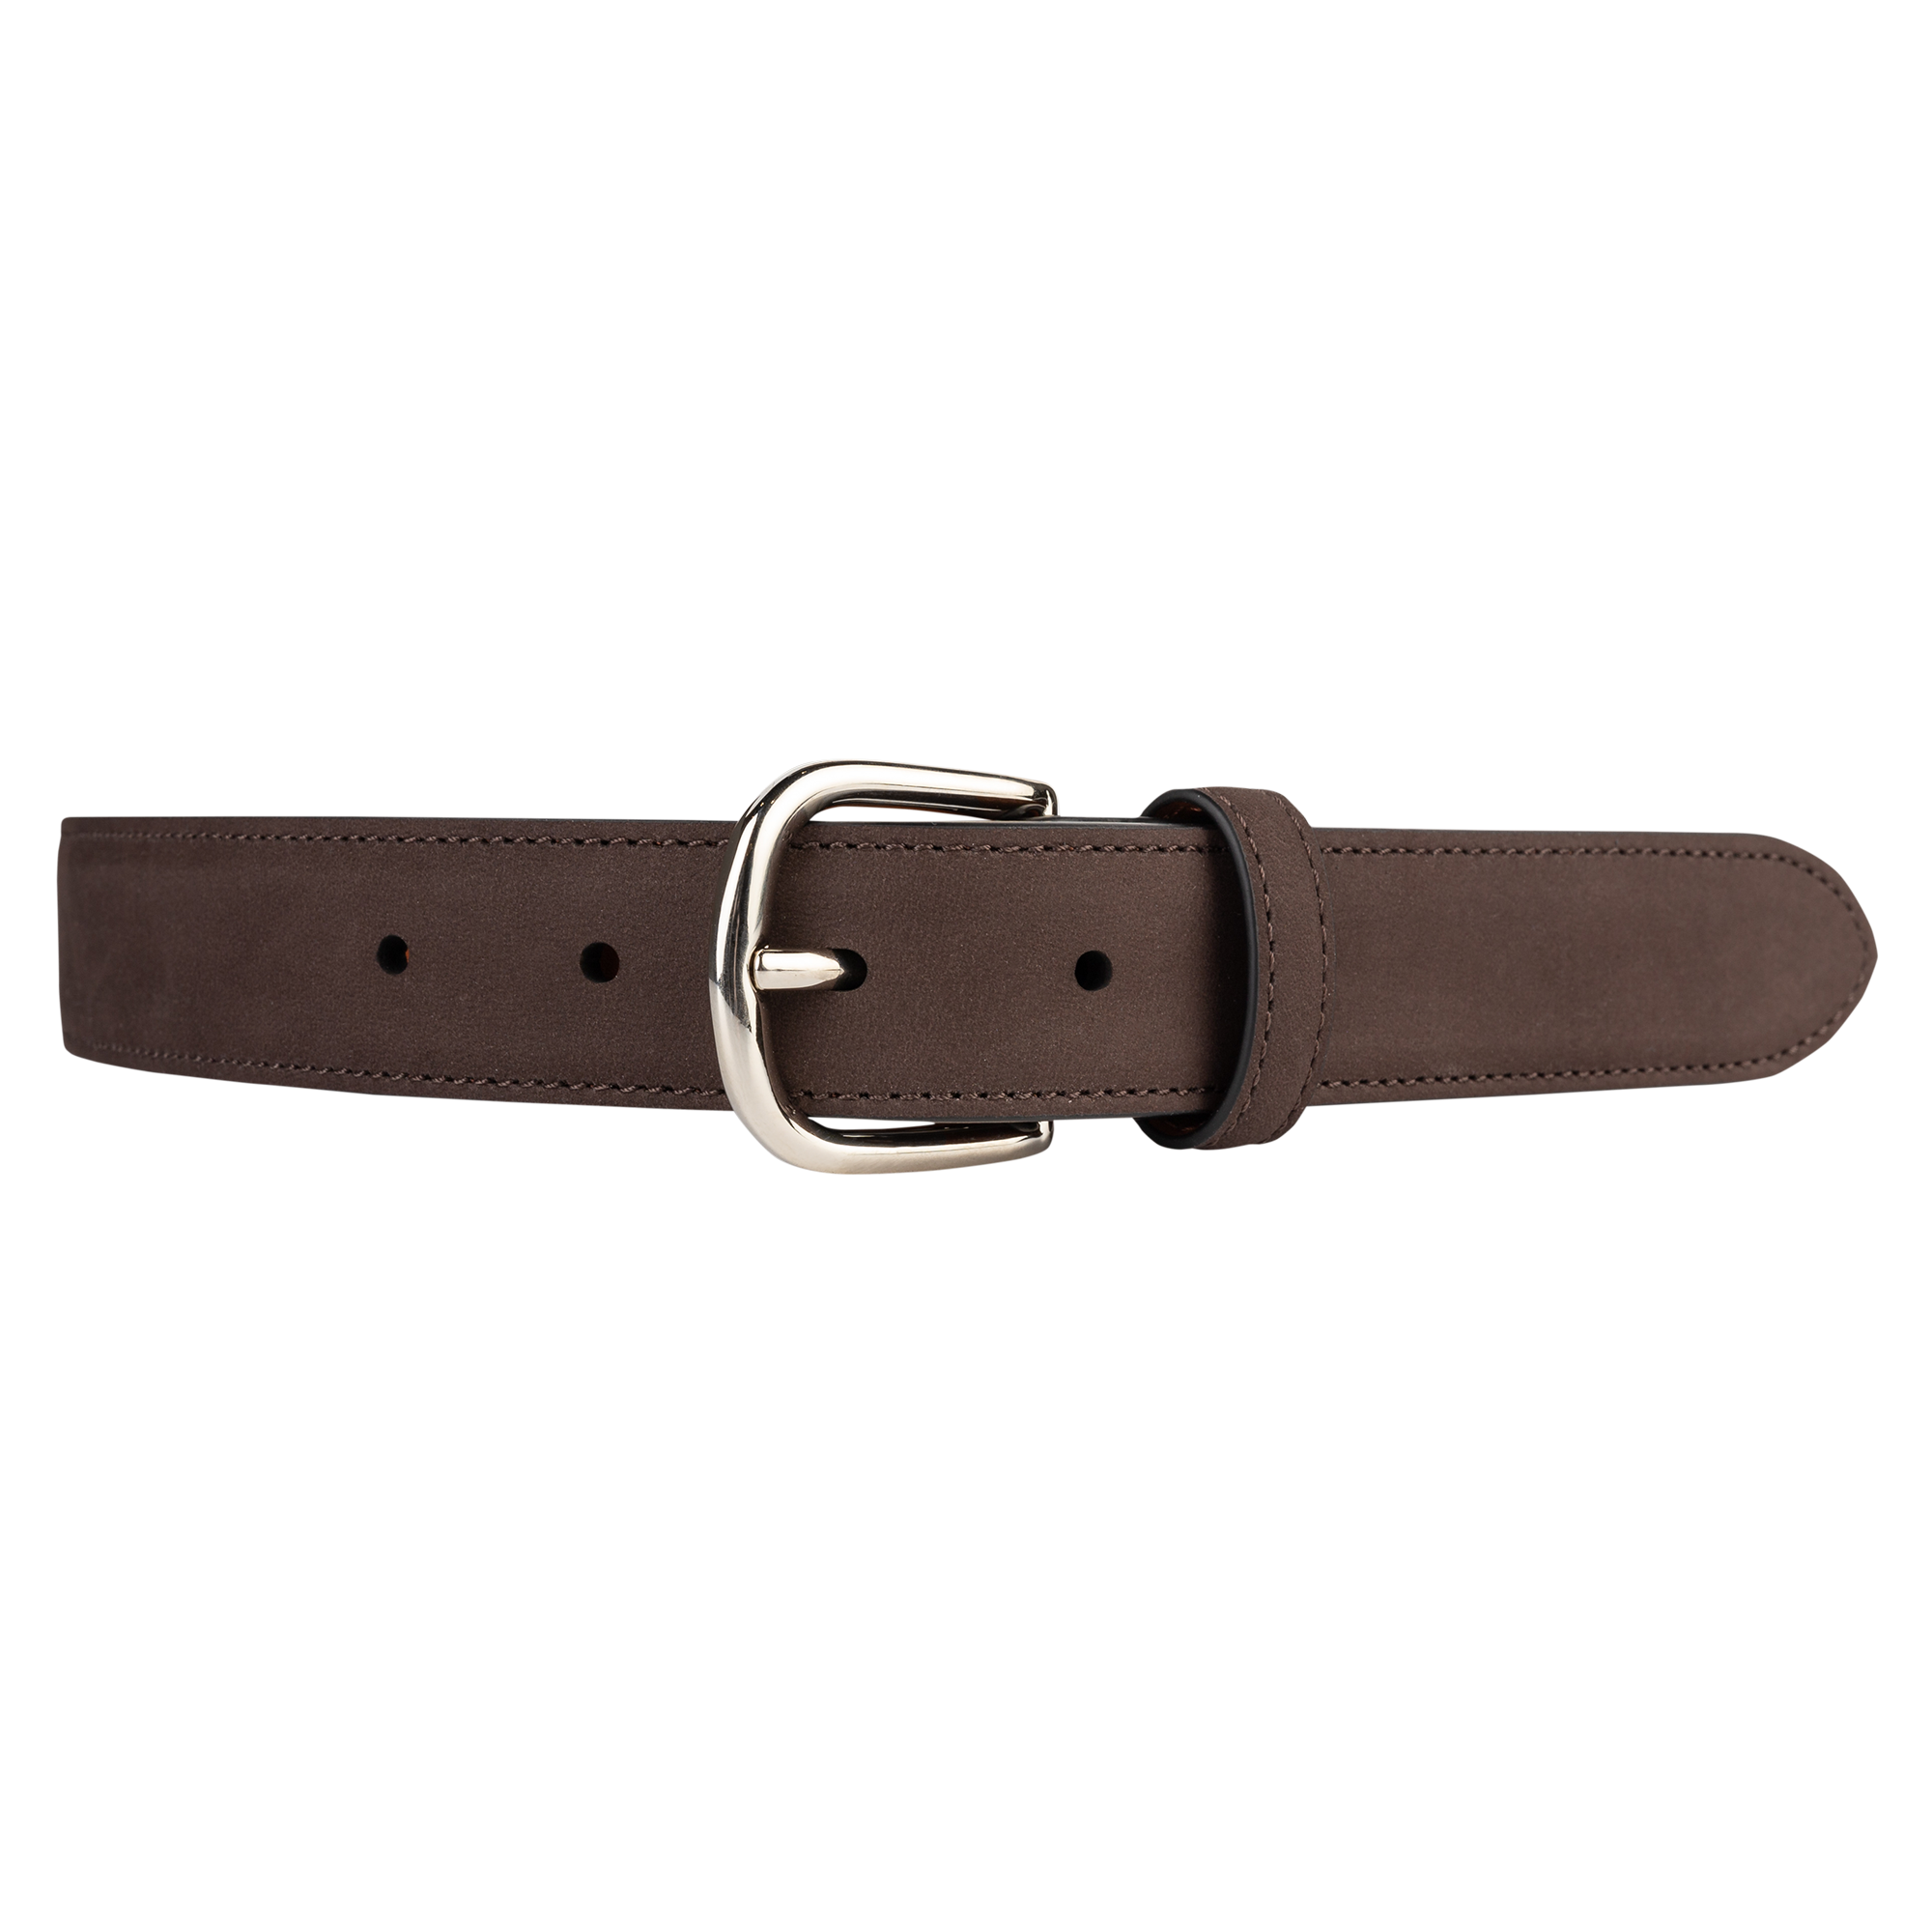 Brown suede leather belt